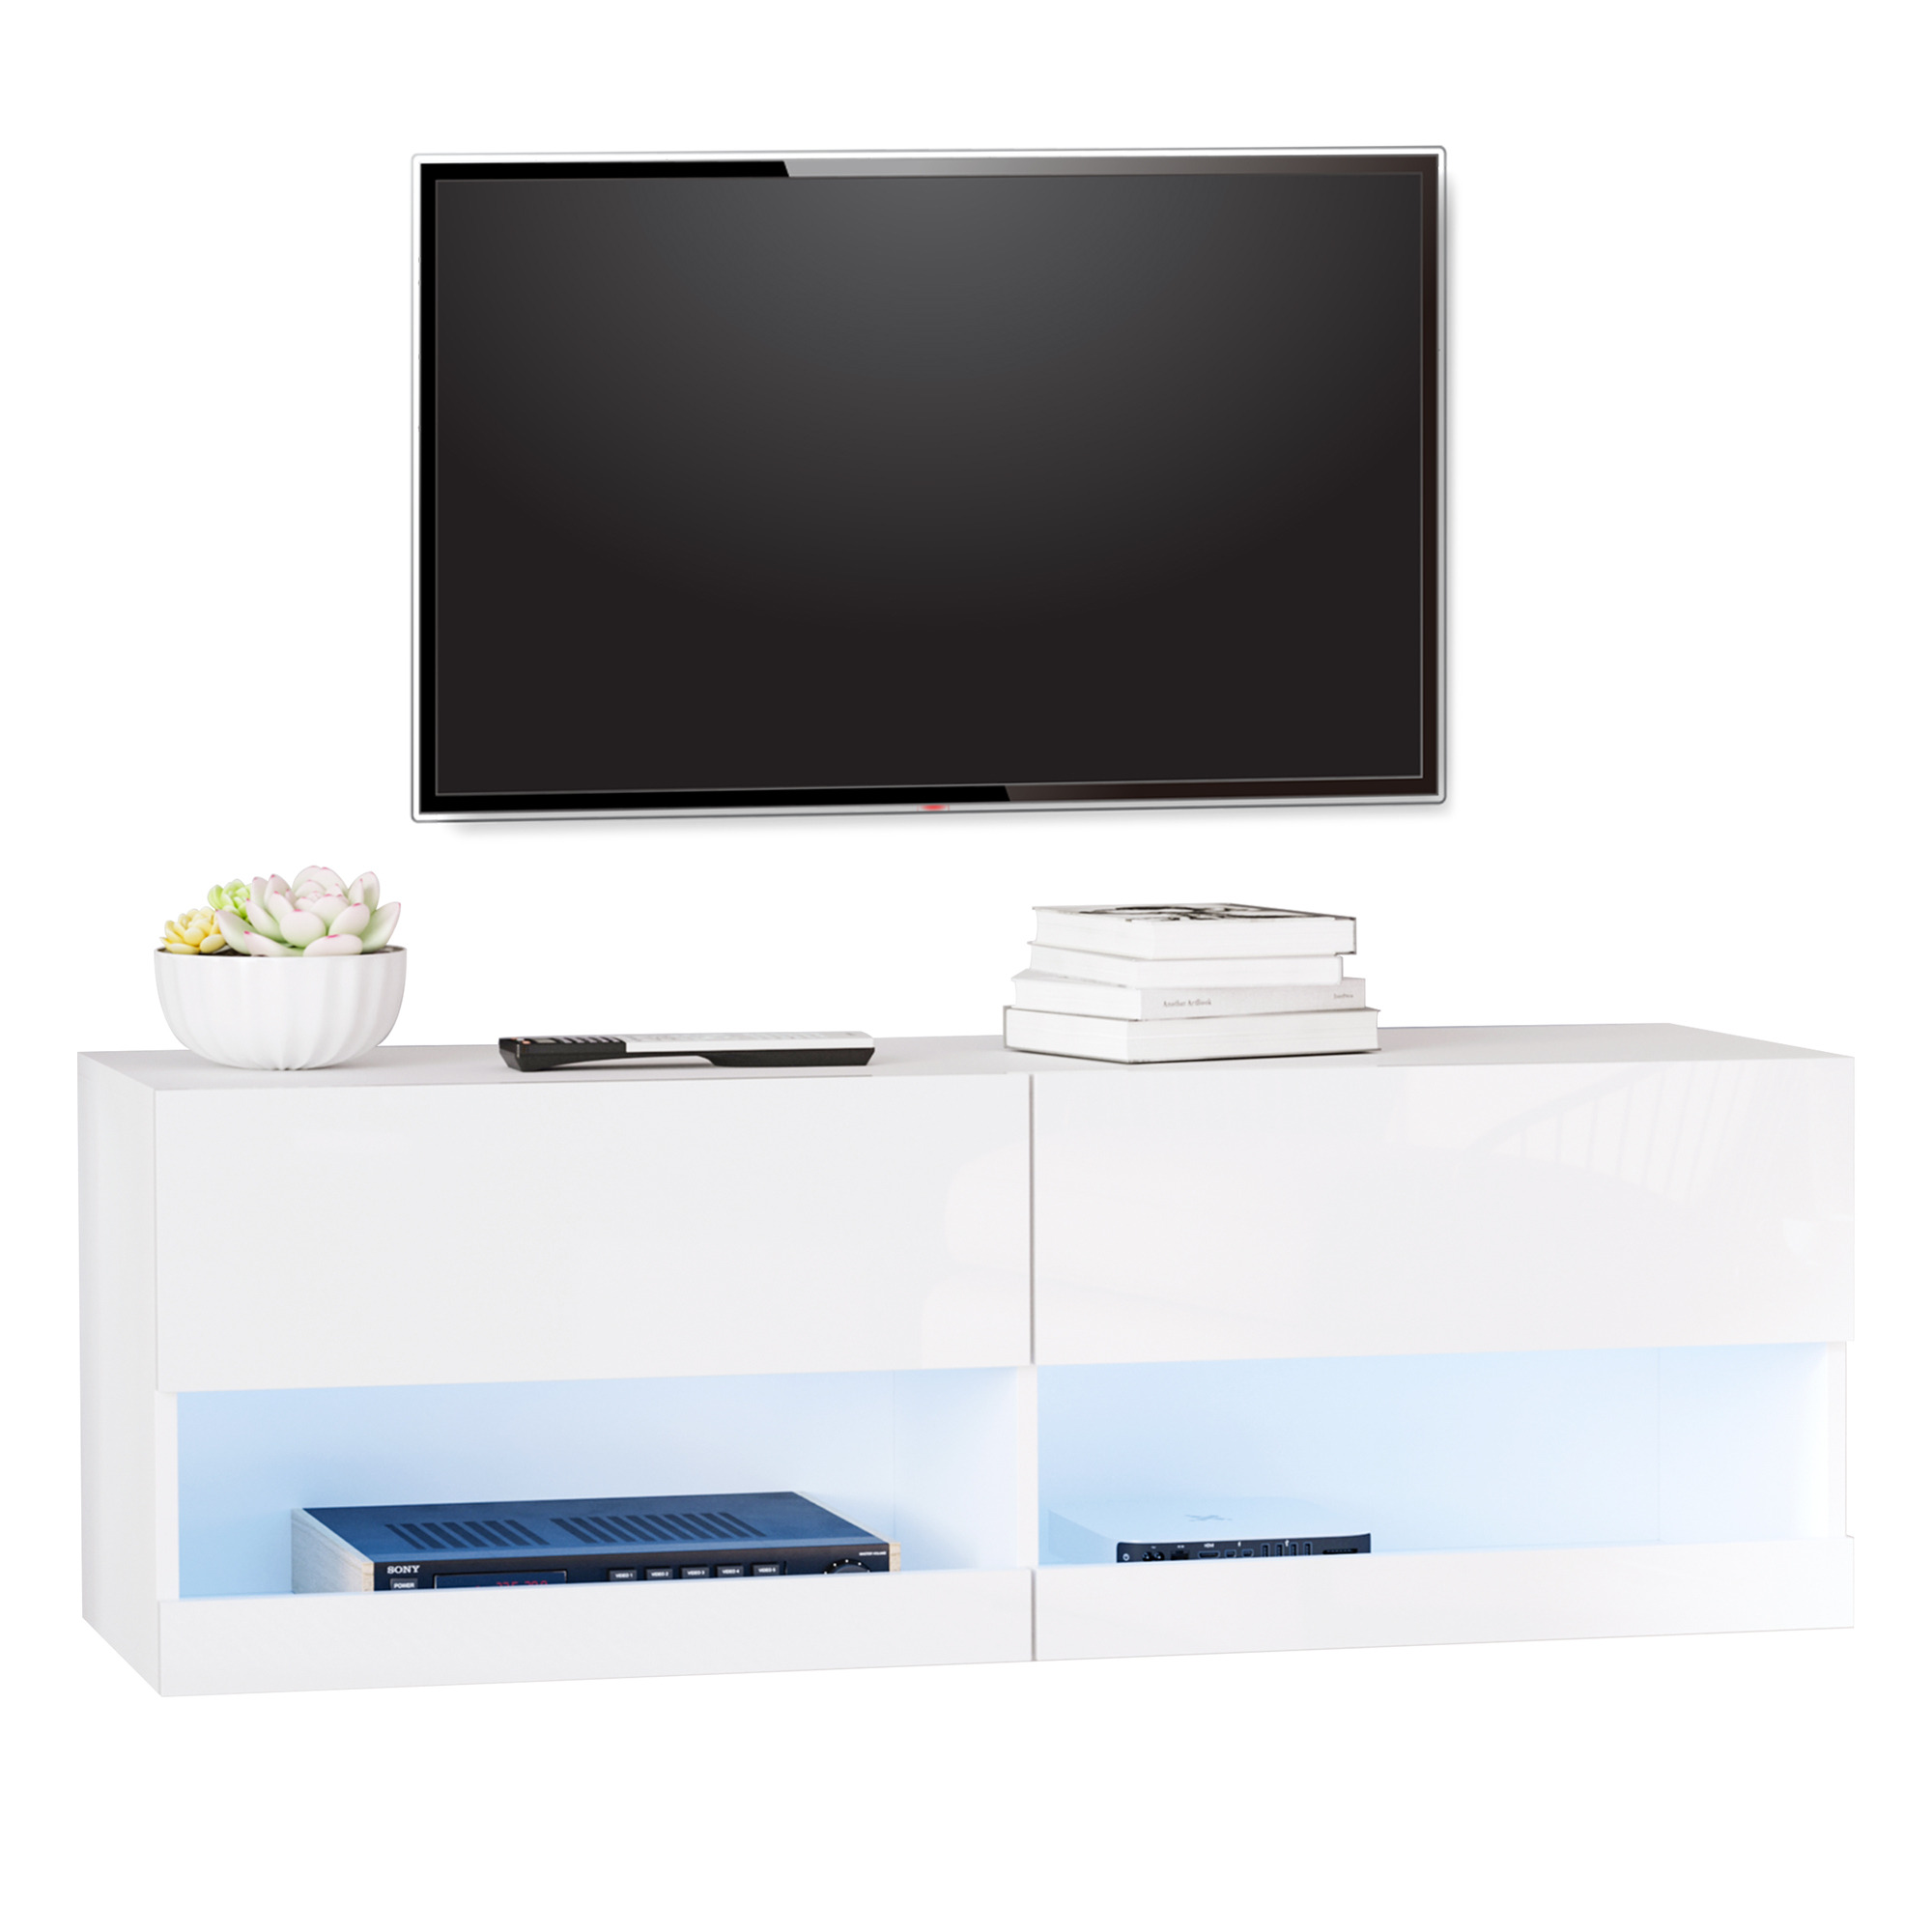 HOMCOM Wall Mount TV Stand with 20 Colors LED Lights, Remote Control, High Gloss Entertainment Center Media Console with Storage Compartments